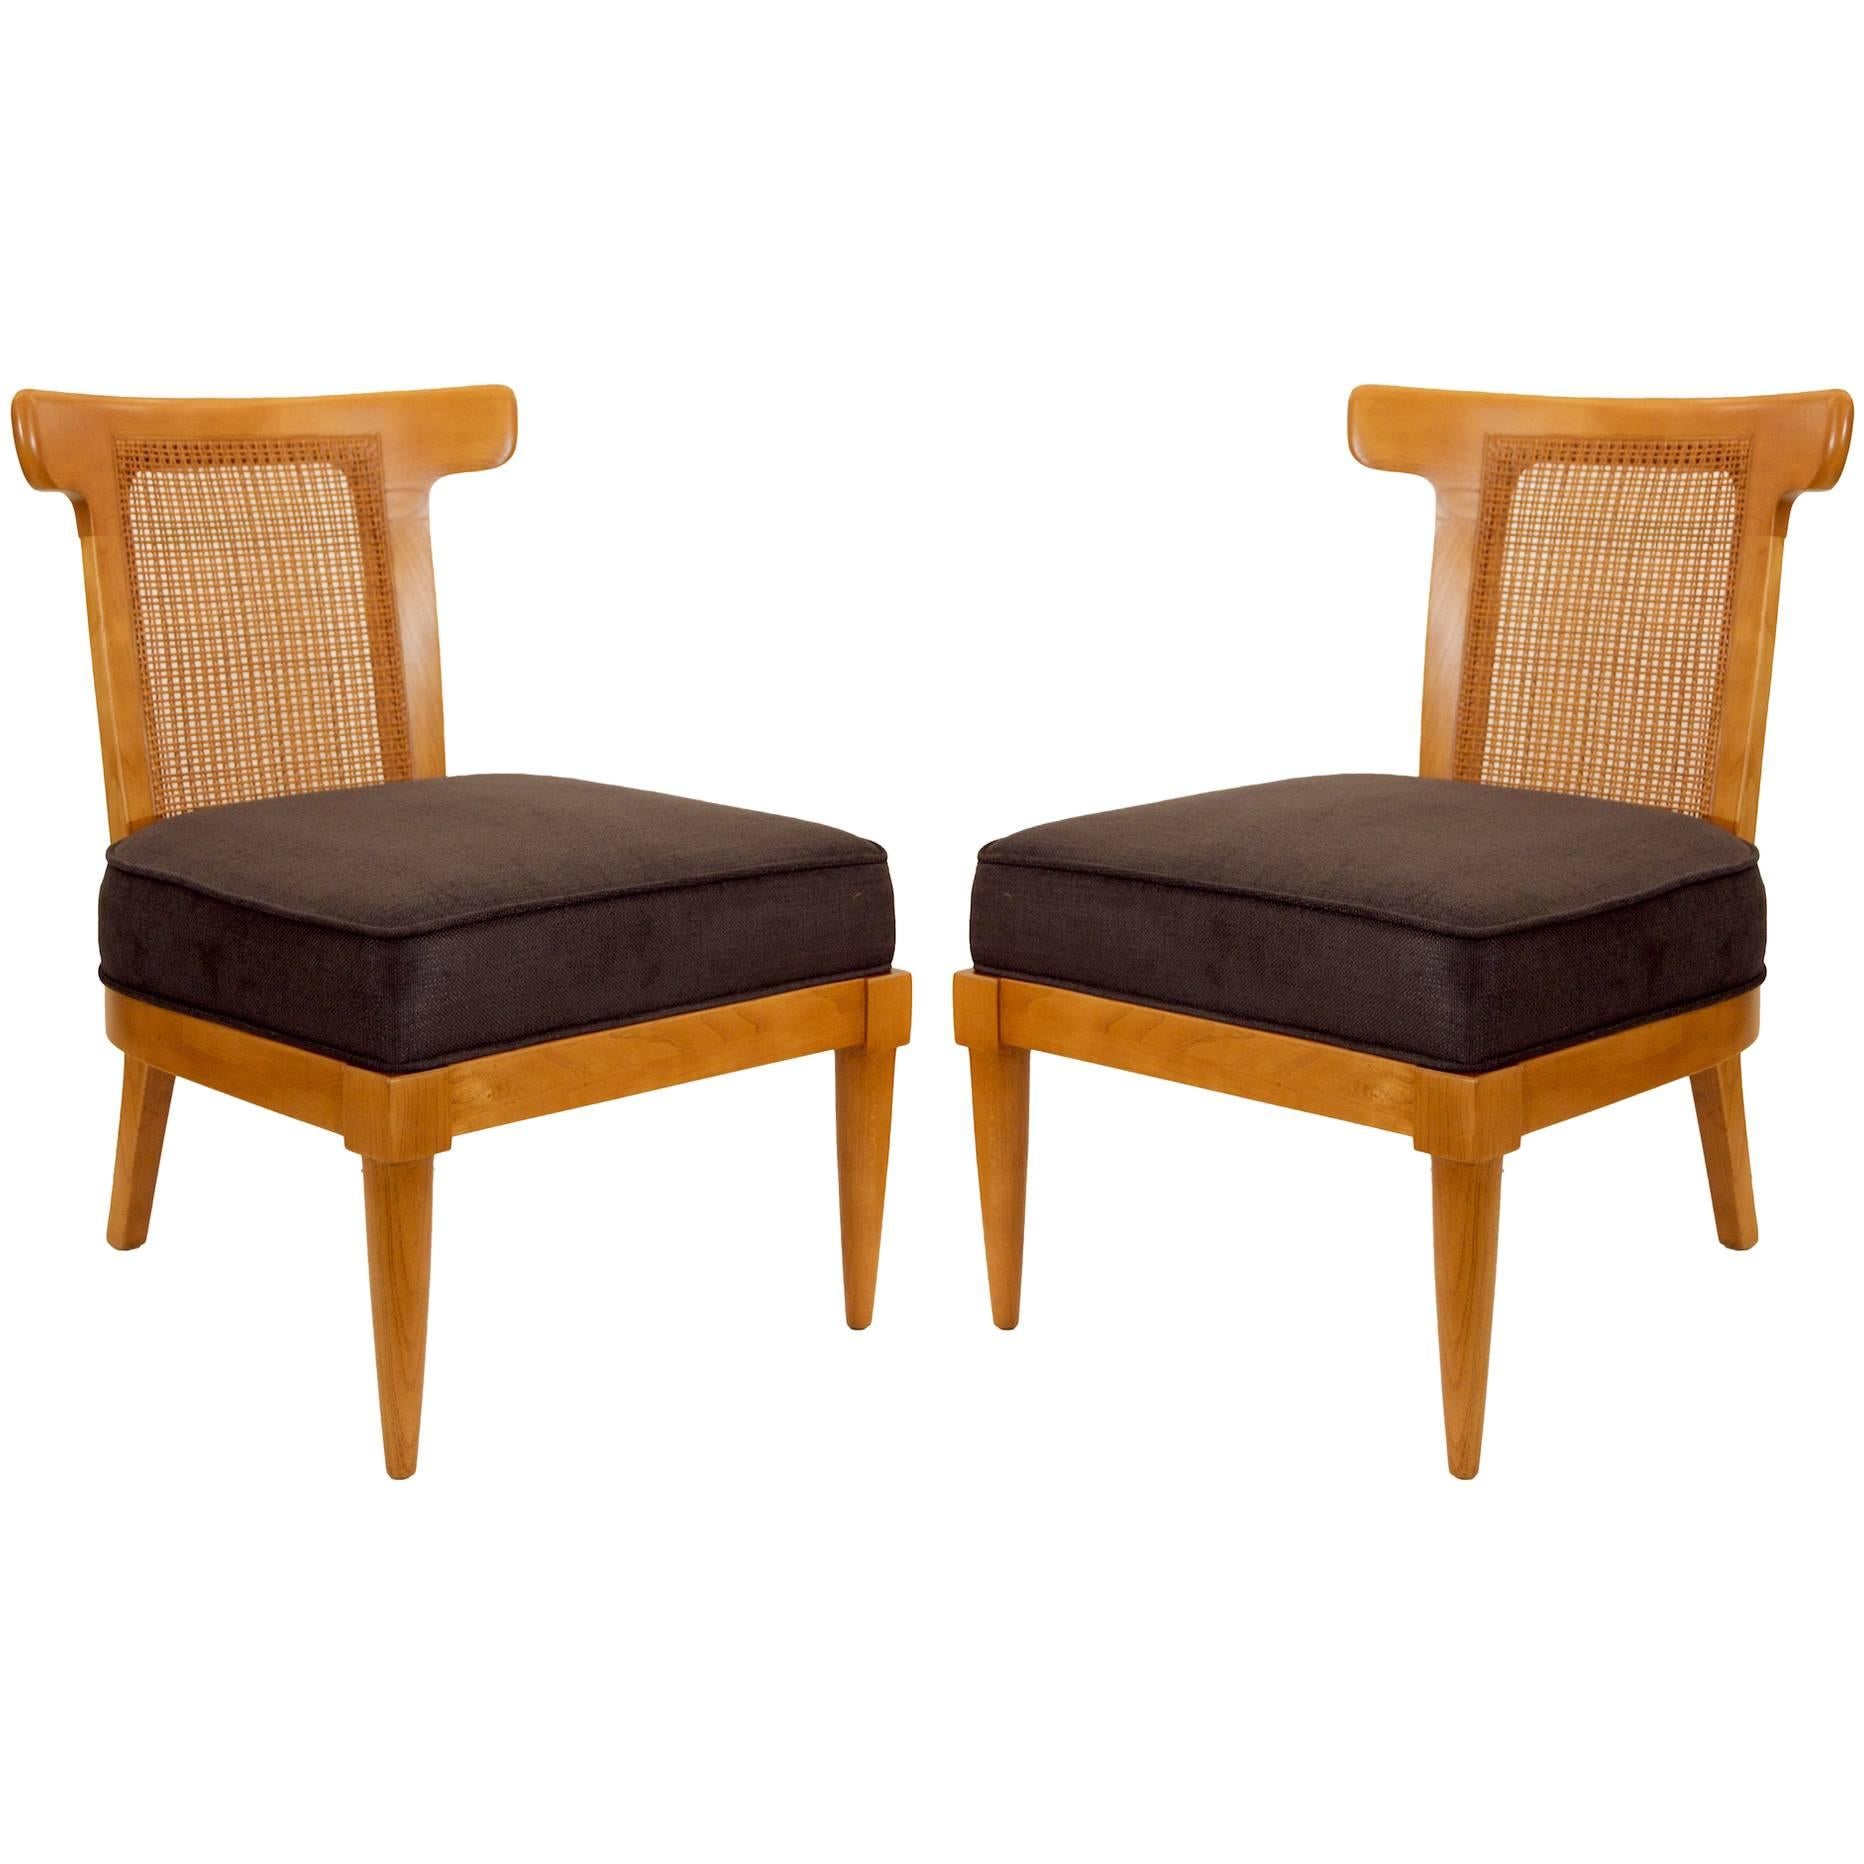 Pair of Tomlinson Slipper Chairs